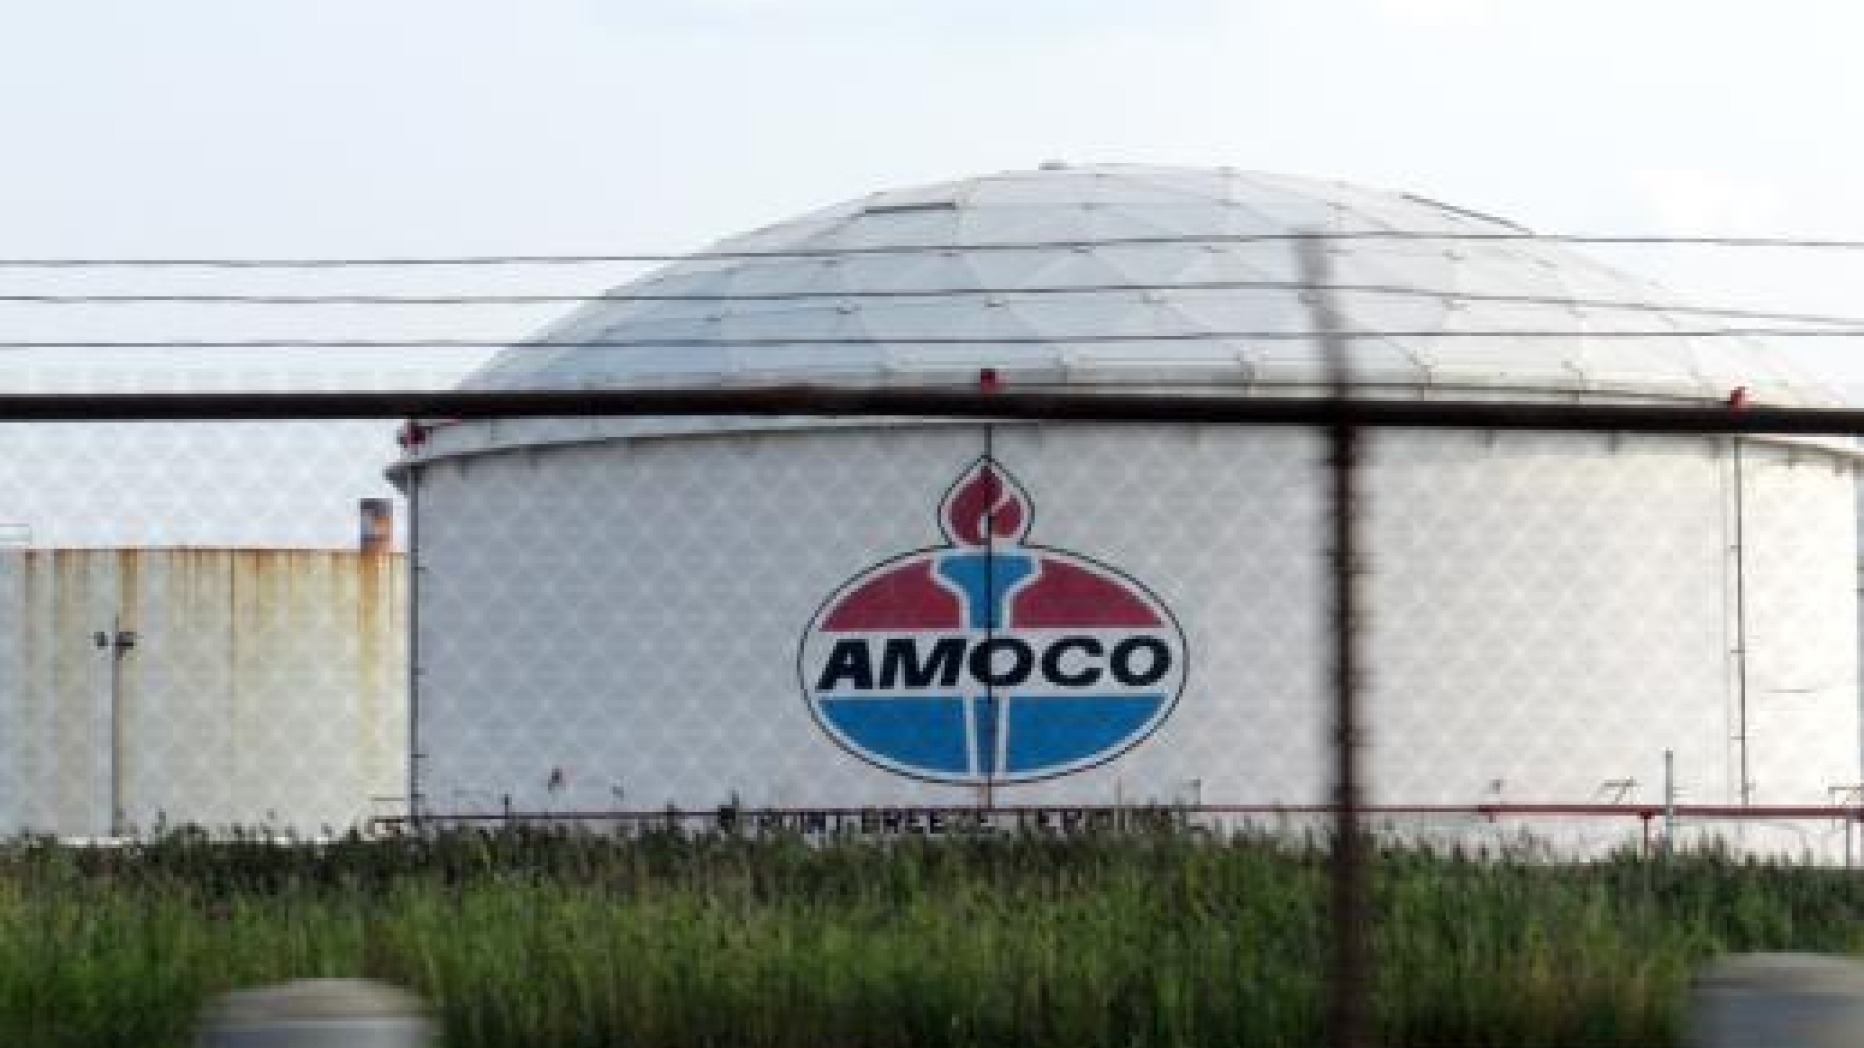 An industrial structure featuring the Amoco logo in an oil refinery in the Lower Schuylkill area.